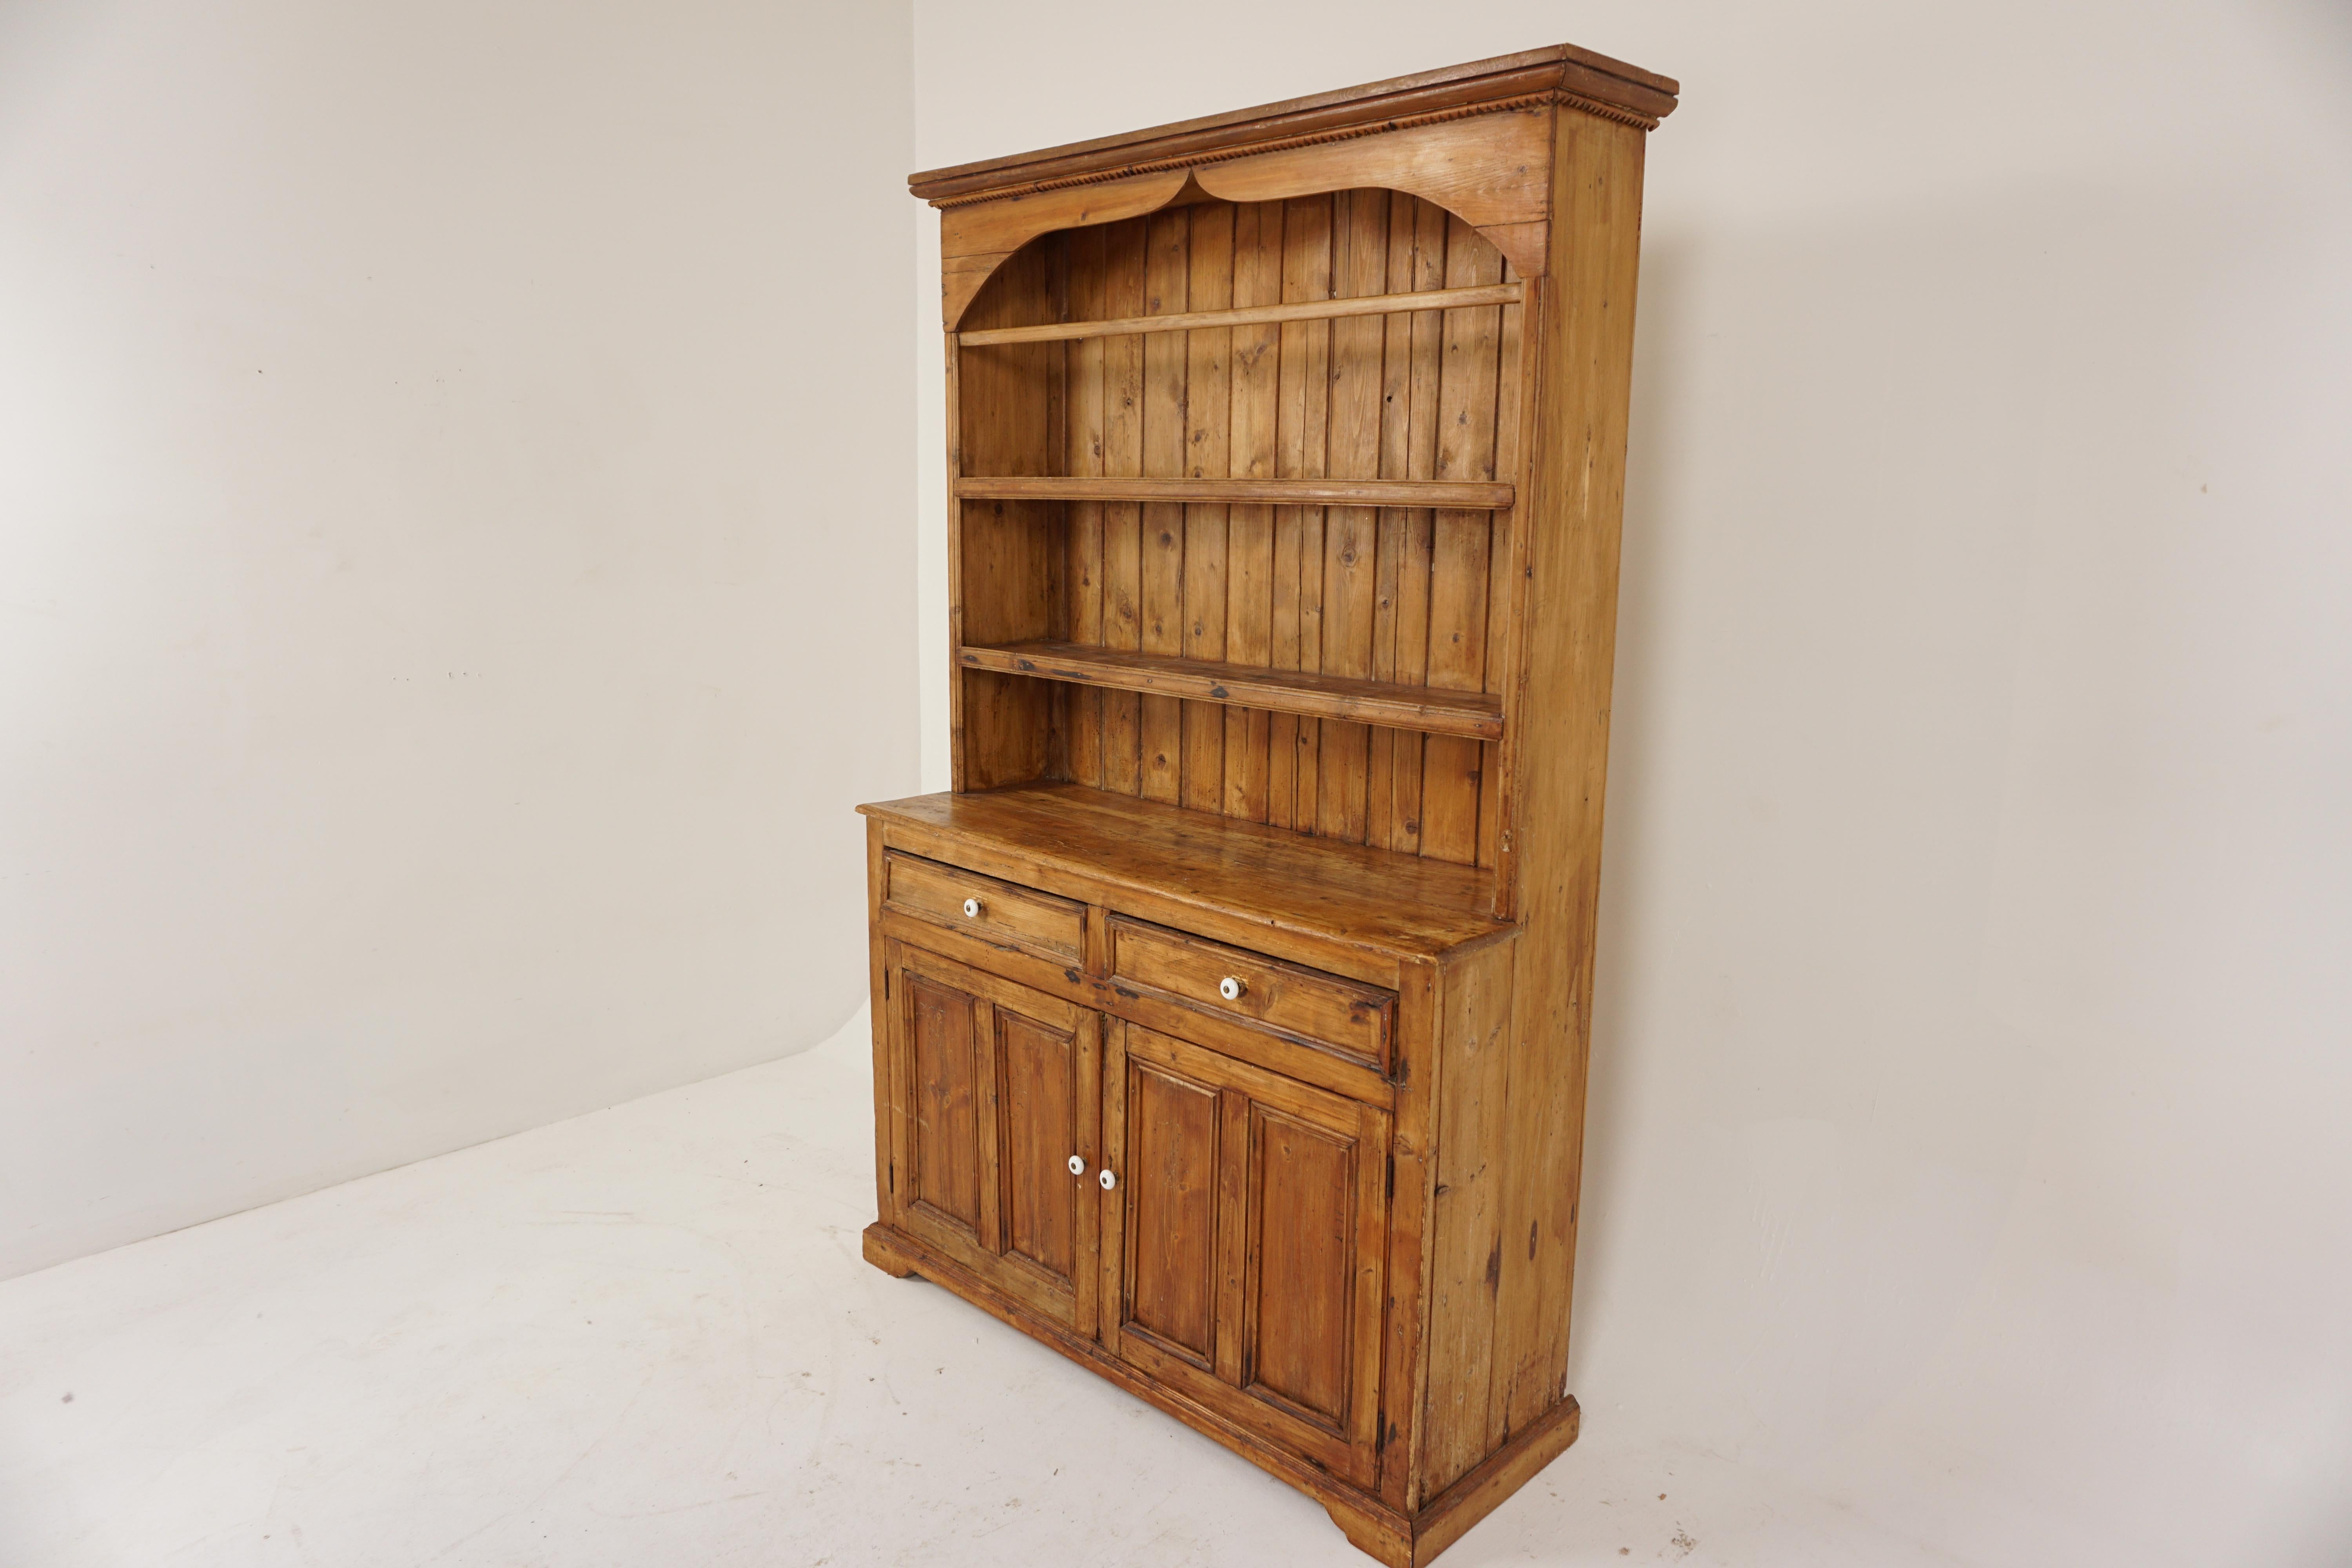 Antique Victorian Pine farmhouse Welsh dresser, buffet, sideboard, Scotland 1870, H352

Scotland 1870
Solid Pine
Original finish
Moulded cornice on top with carved frieze below
With two fixed moulded front shelves
Has pine backboards
The base has